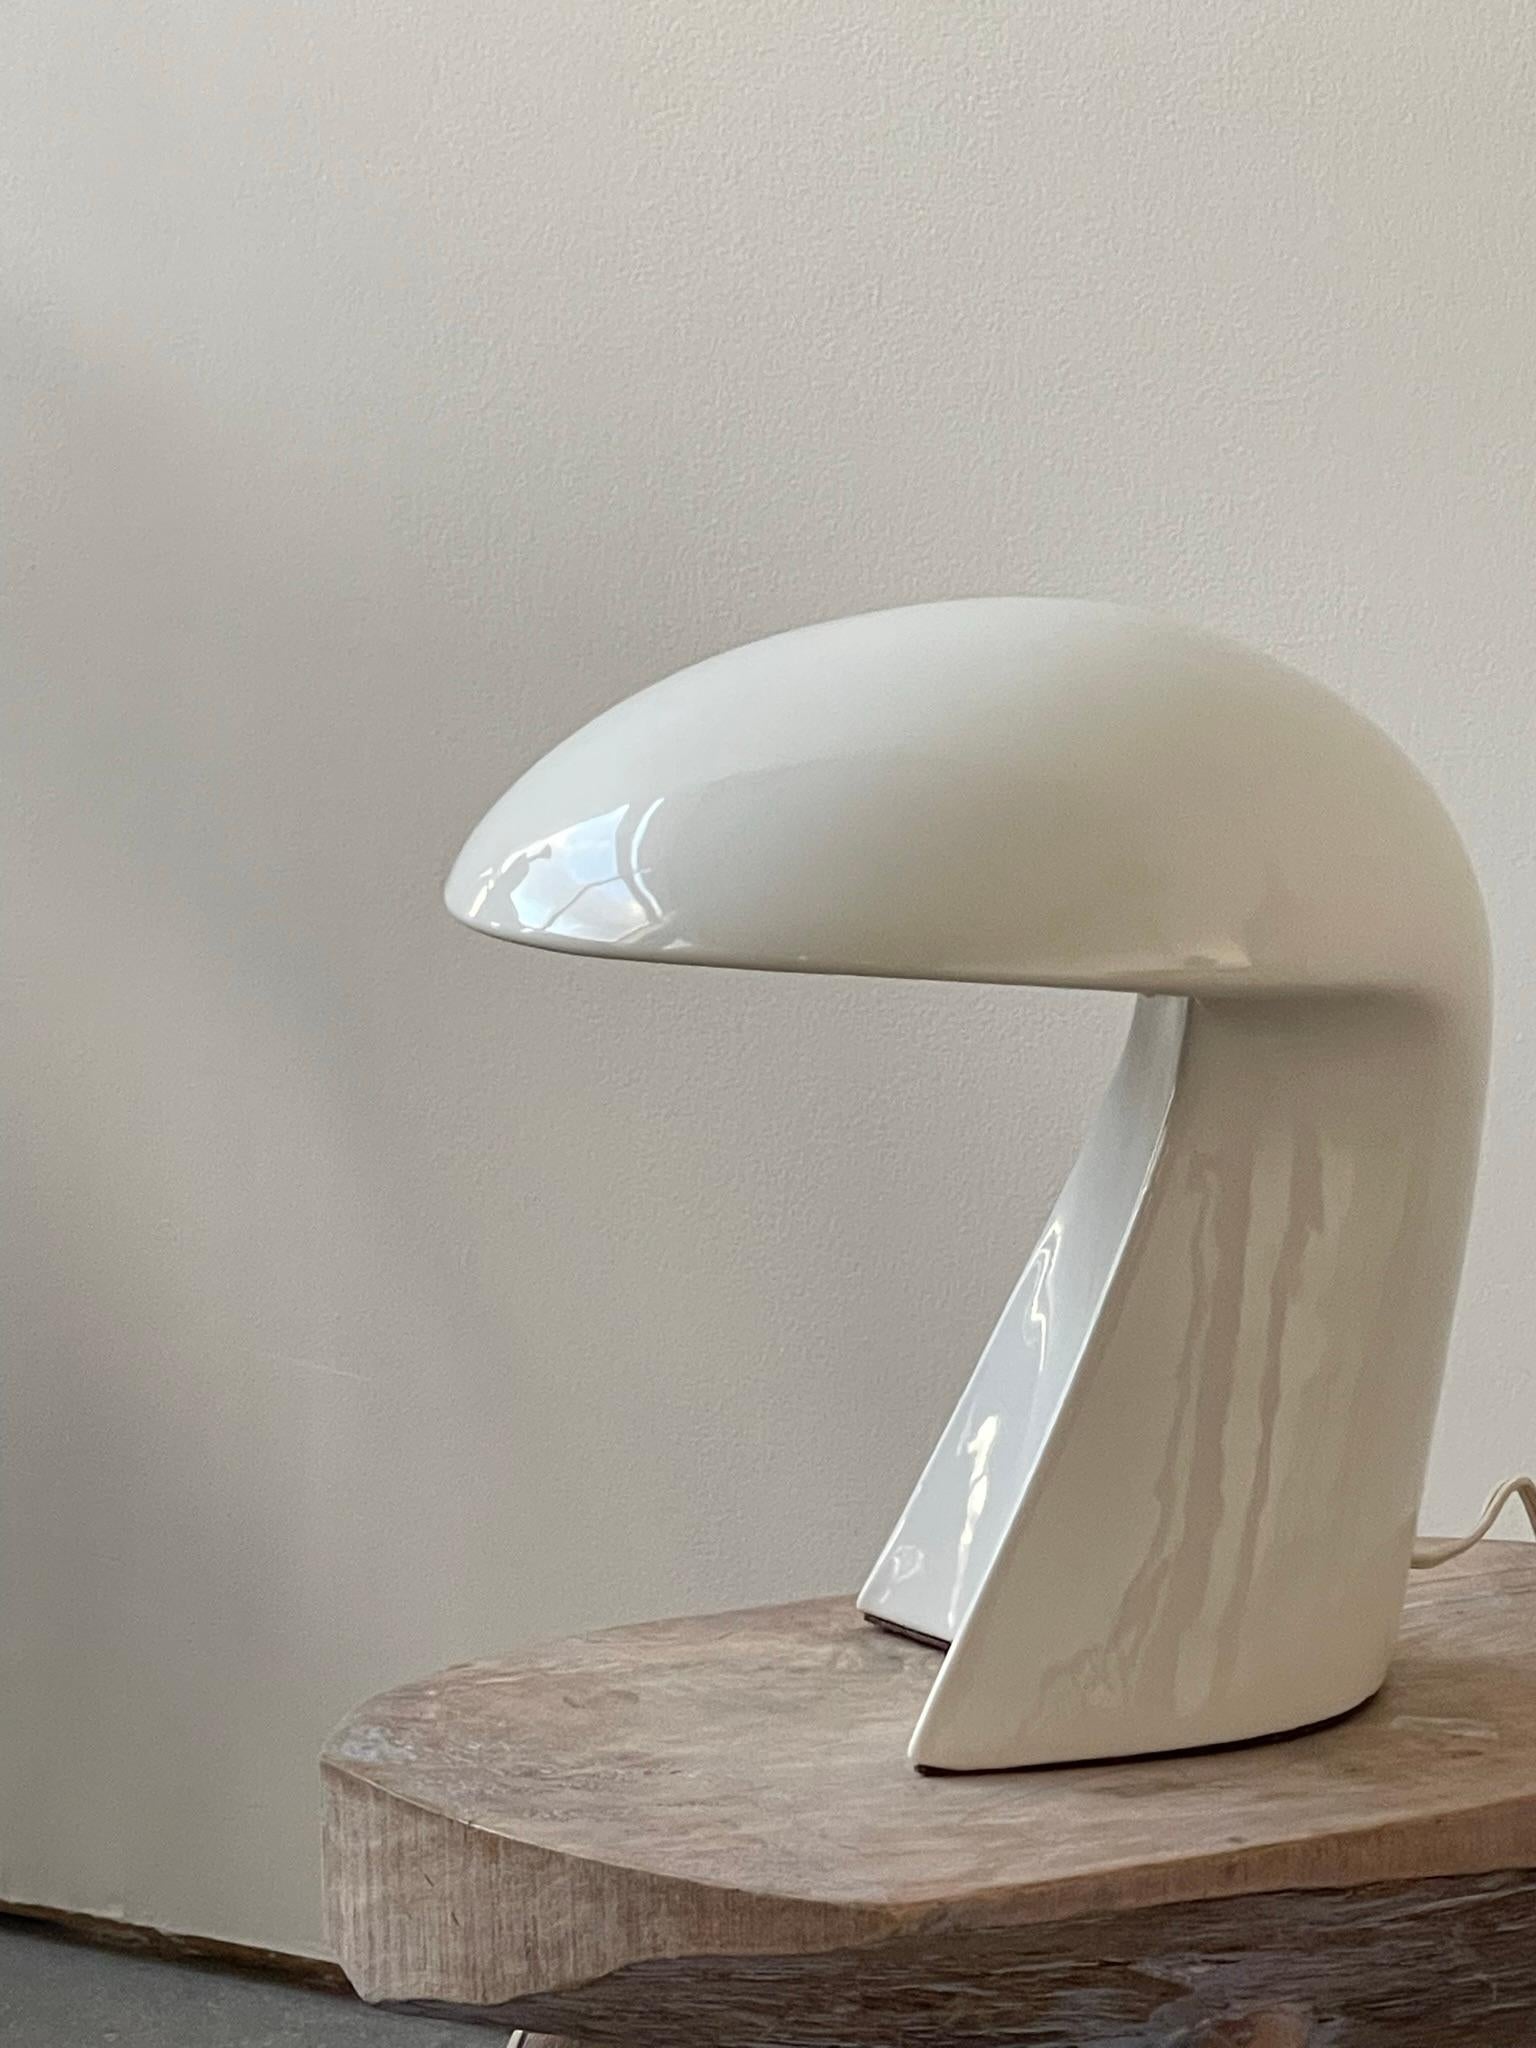 20th century Space age Ceramic lamp in the style of Marcello Cuneo or Liisi Beckmann and unlike any others that are commonly loud colors, this one is in a perfect glossy white. Timeless piece created with such poise in an excellent space age shape.